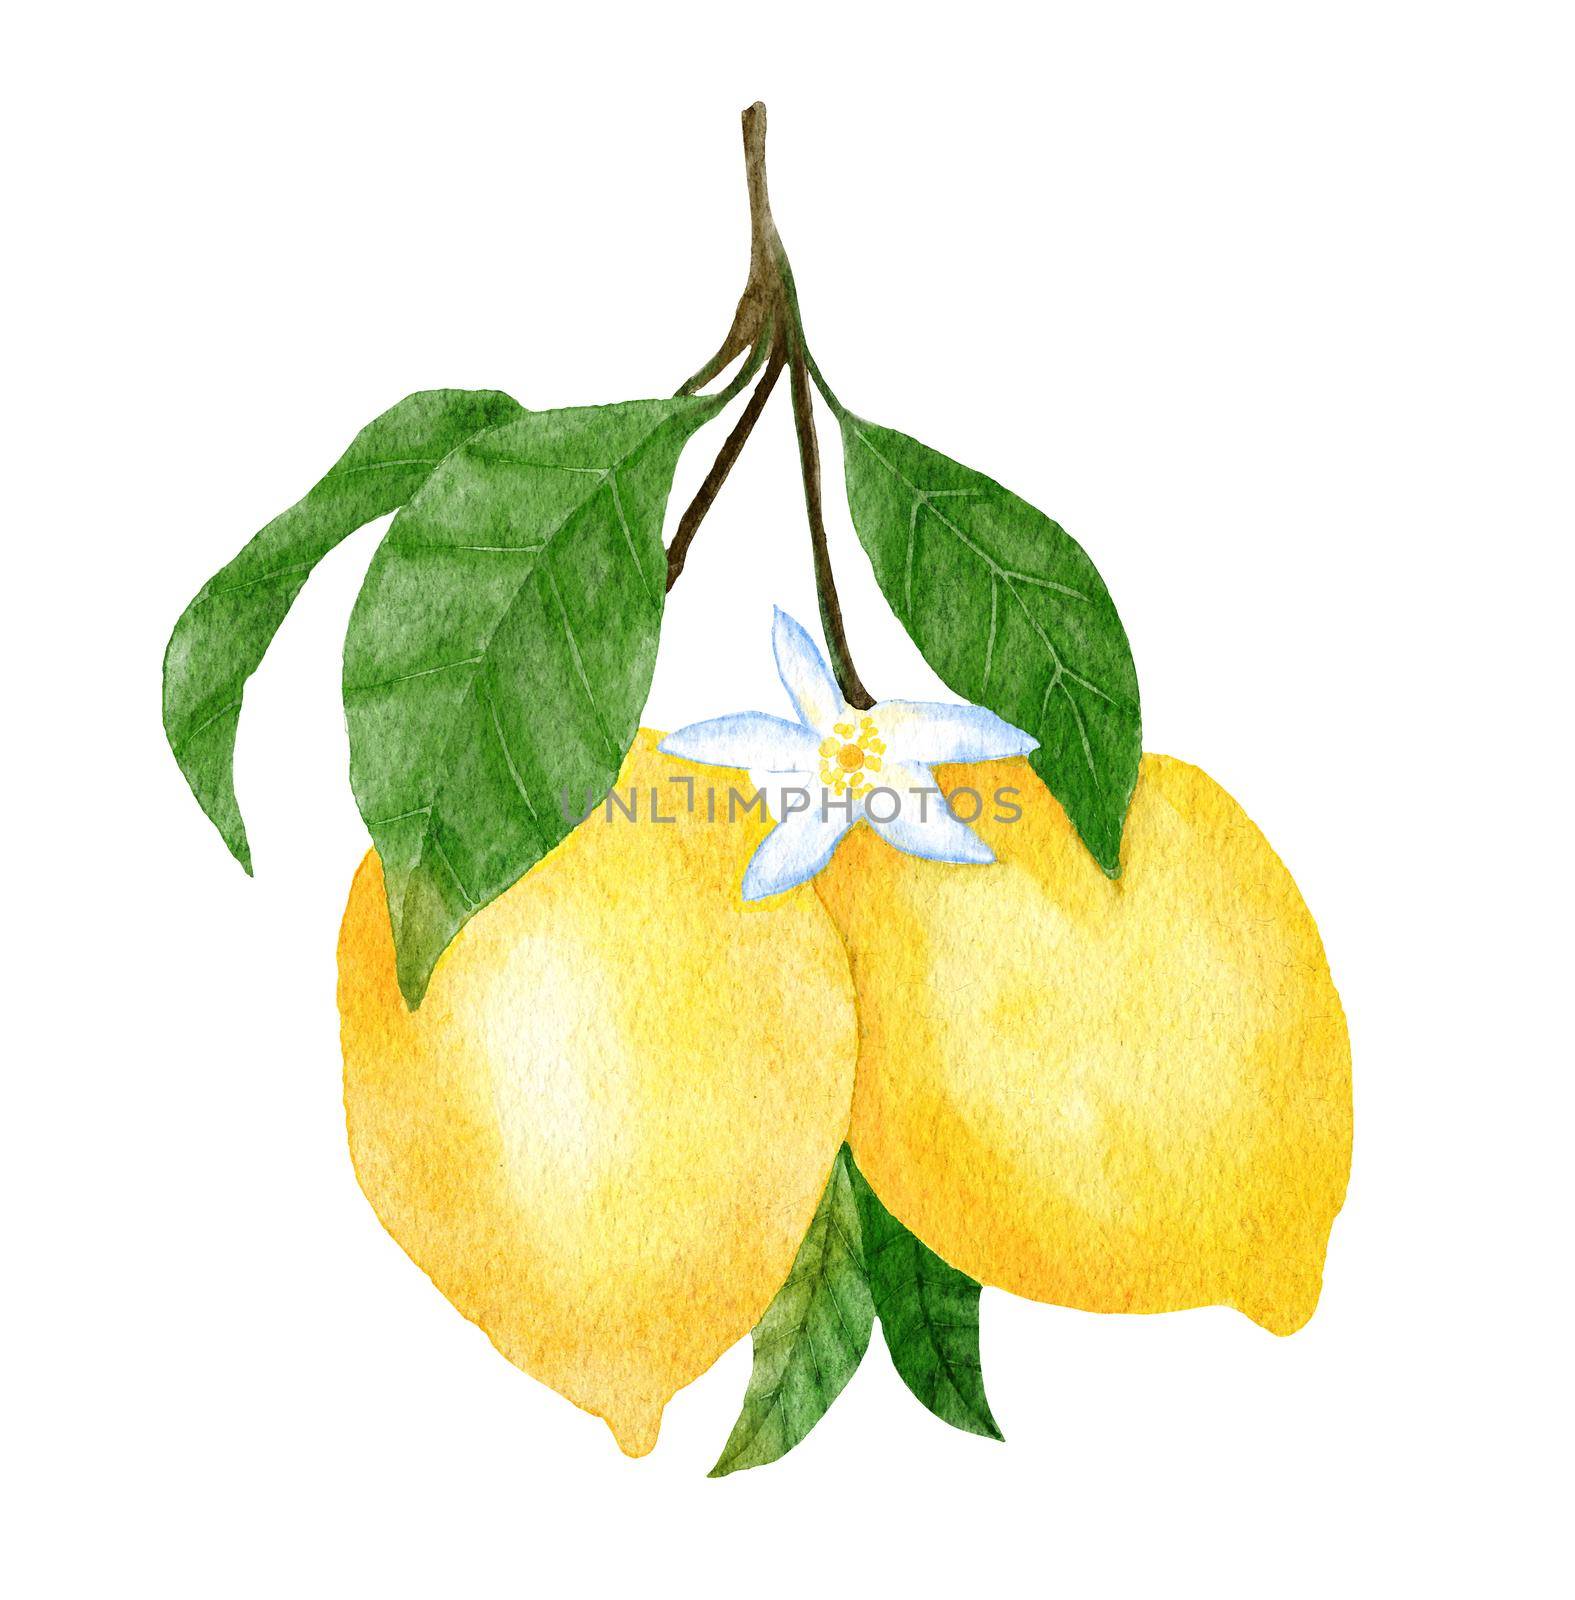 Watercolor hand drawn illustration with yellow ripe mediterranean lemons and green leaves. Summer fruit citrus clipart for wedding cards invitations, nature design